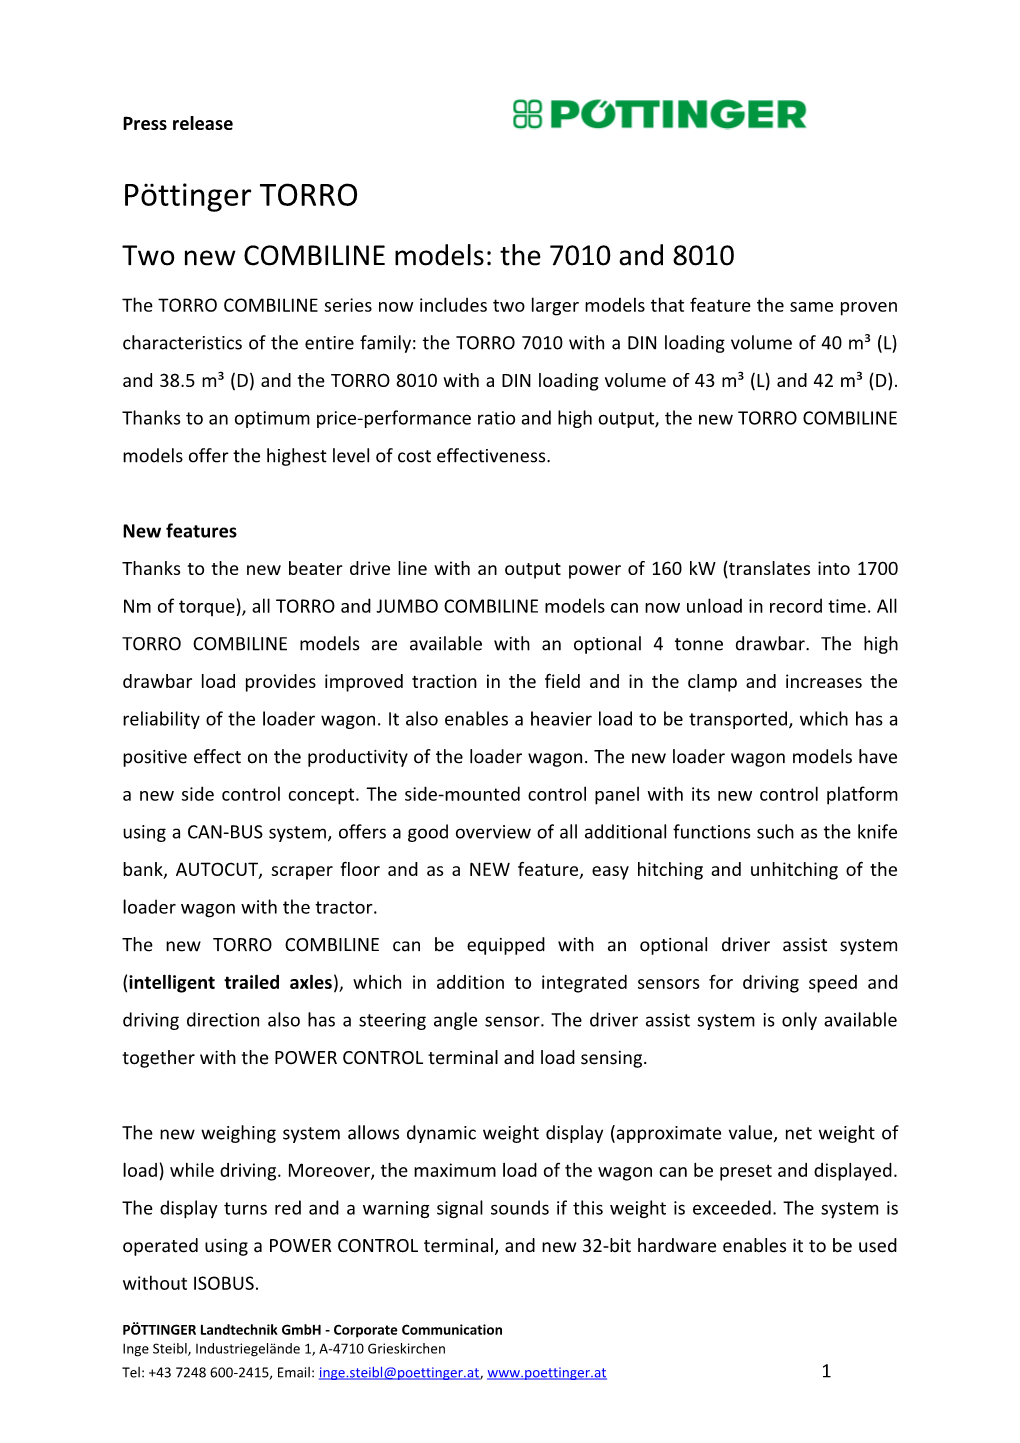 Two New COMBILINE Models: the 7010 and 8010